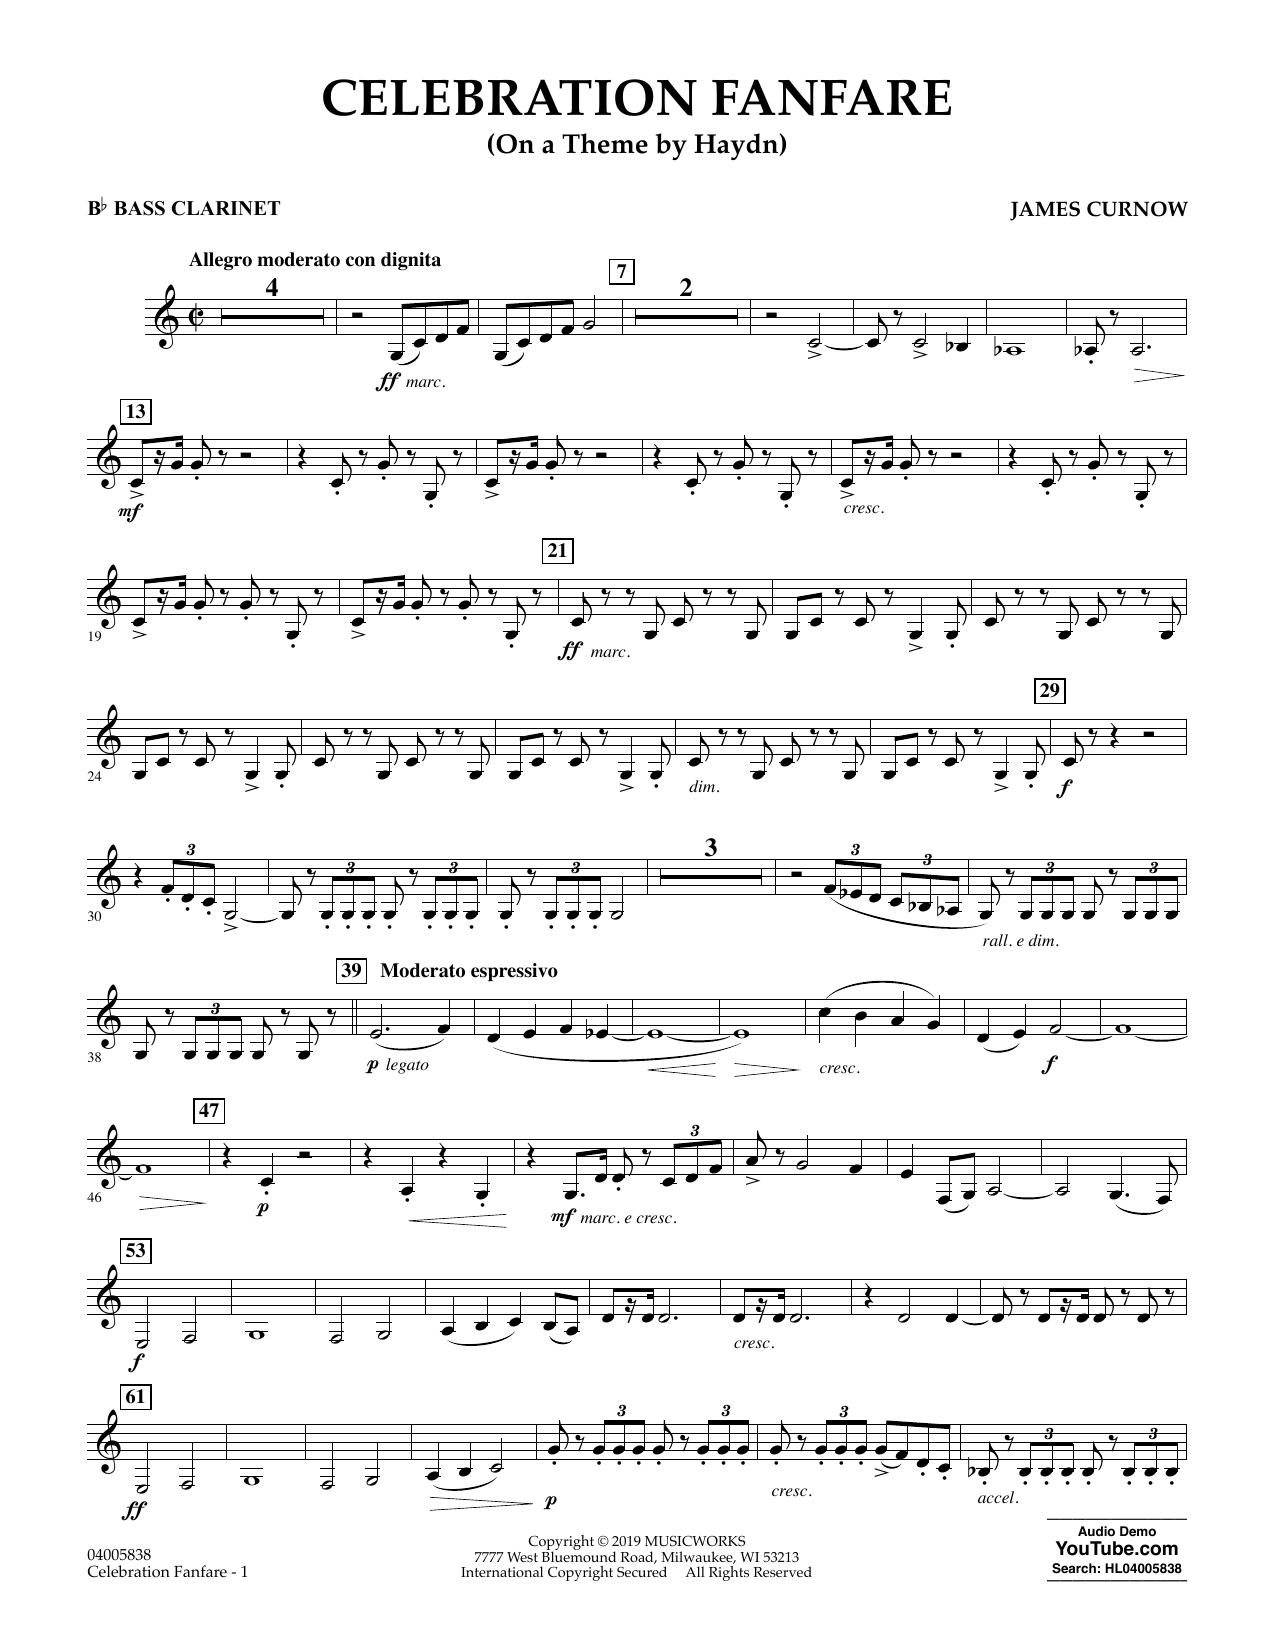 James Curnow Celebration Fanfare (On a Theme by Haydn) - Bb Bass Clarinet sheet music preview music notes and score for Concert Band including 2 page(s)